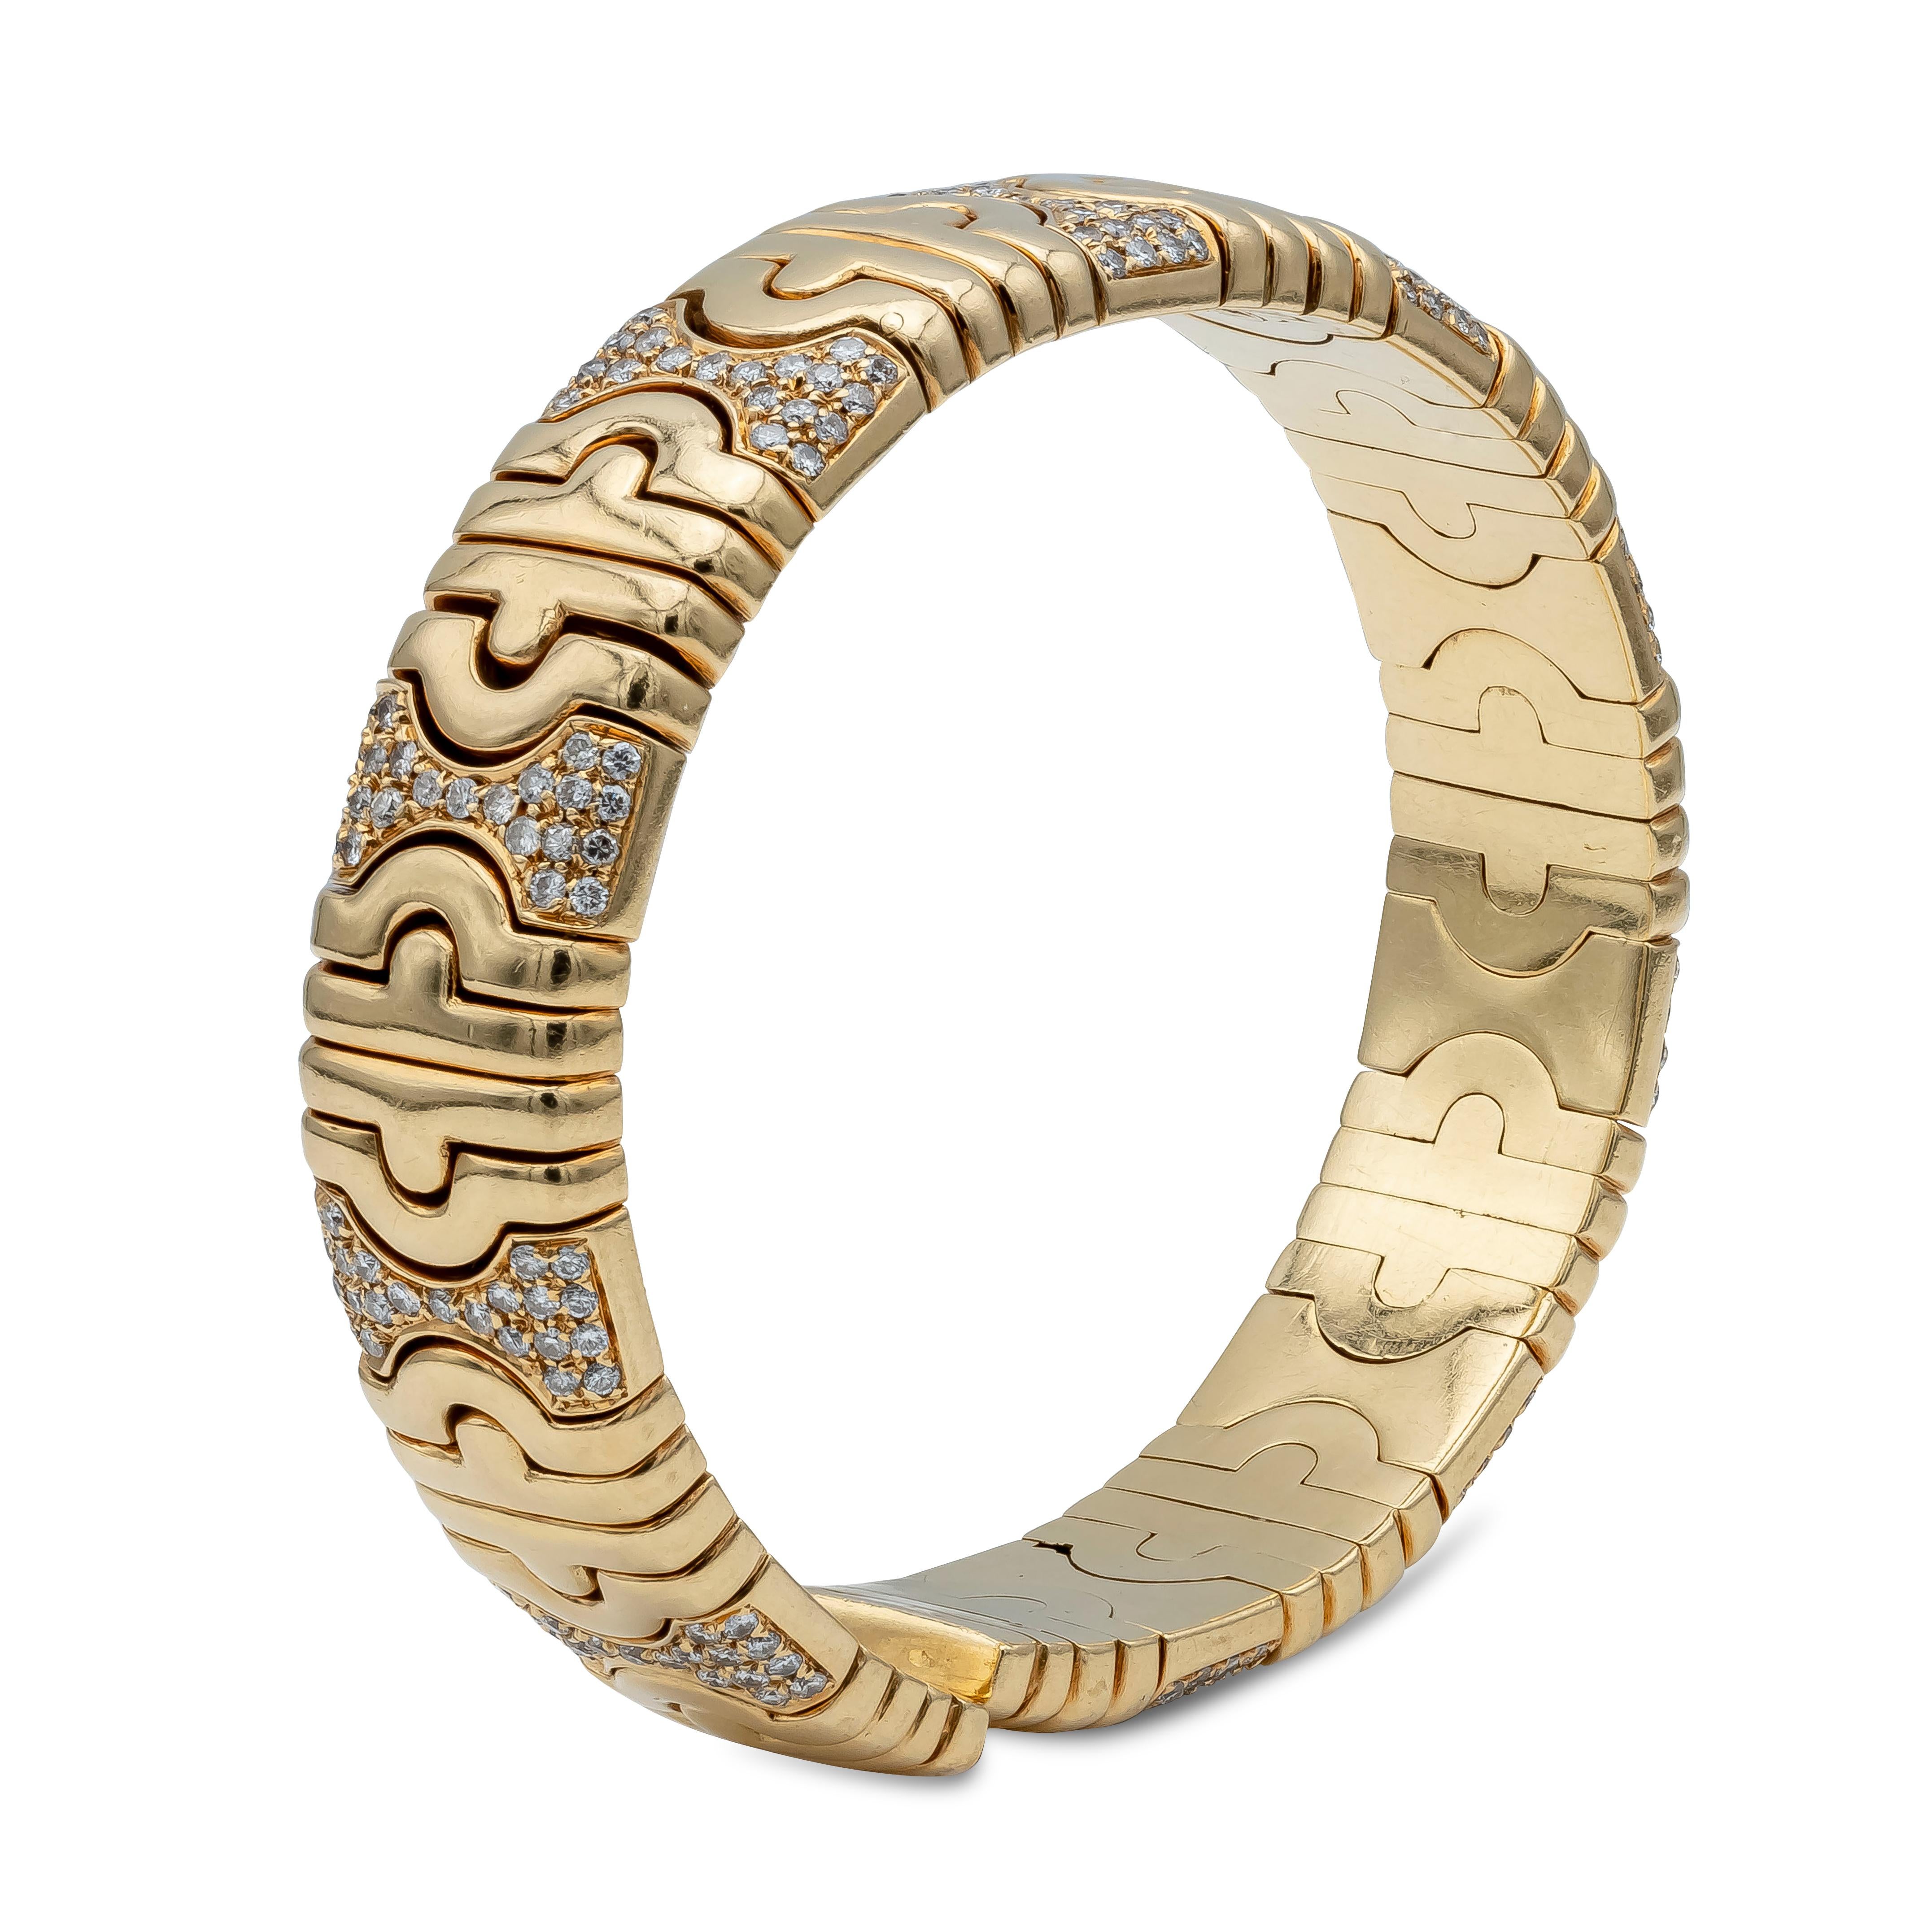 An iconic vintage Bulgari Parentesi 18K Yellow Gold cuff bracelet is composed of sculpted geometric links set with colorless round diamonds for a total weight of 5 carats total, graded F-G Color and VS in Clarity. Has a total gold weight of 80